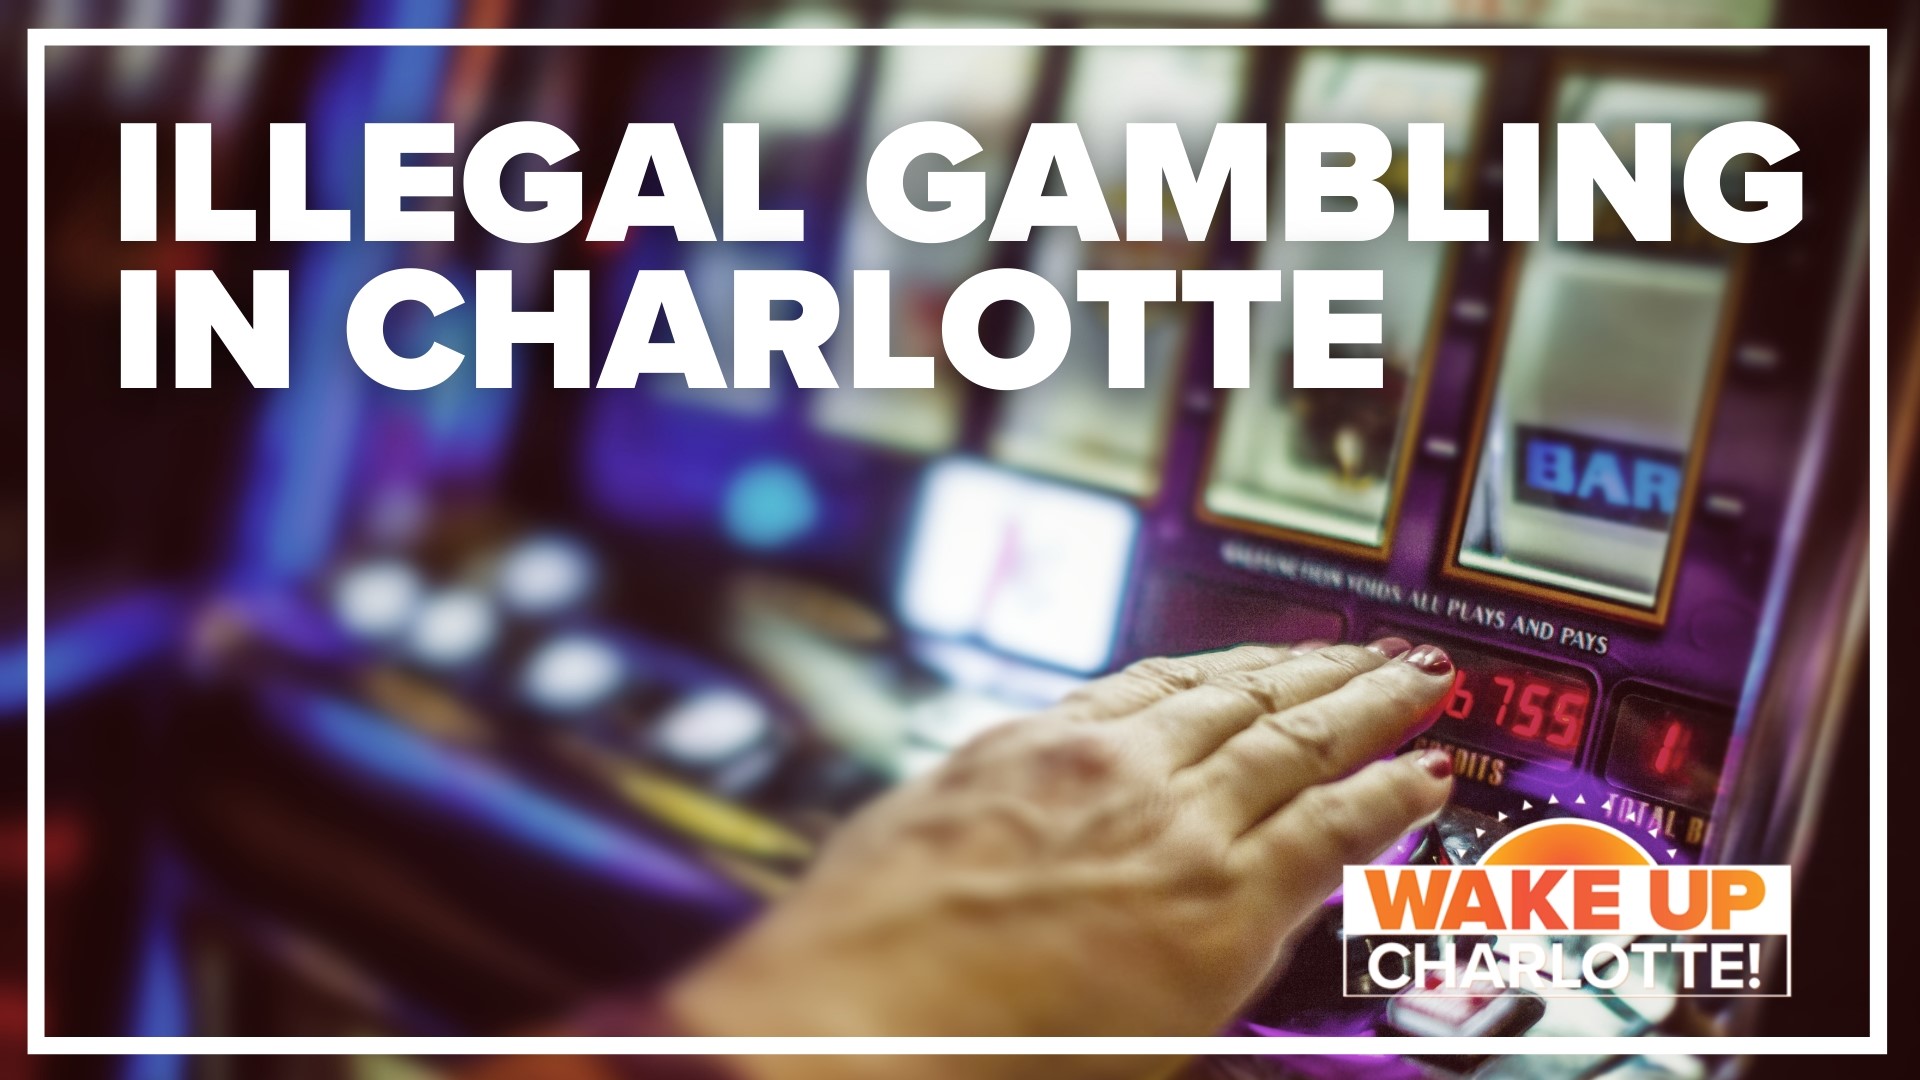 Officials say the number of machines in a facility that contributes to any cash payouts on winnings is illegal.